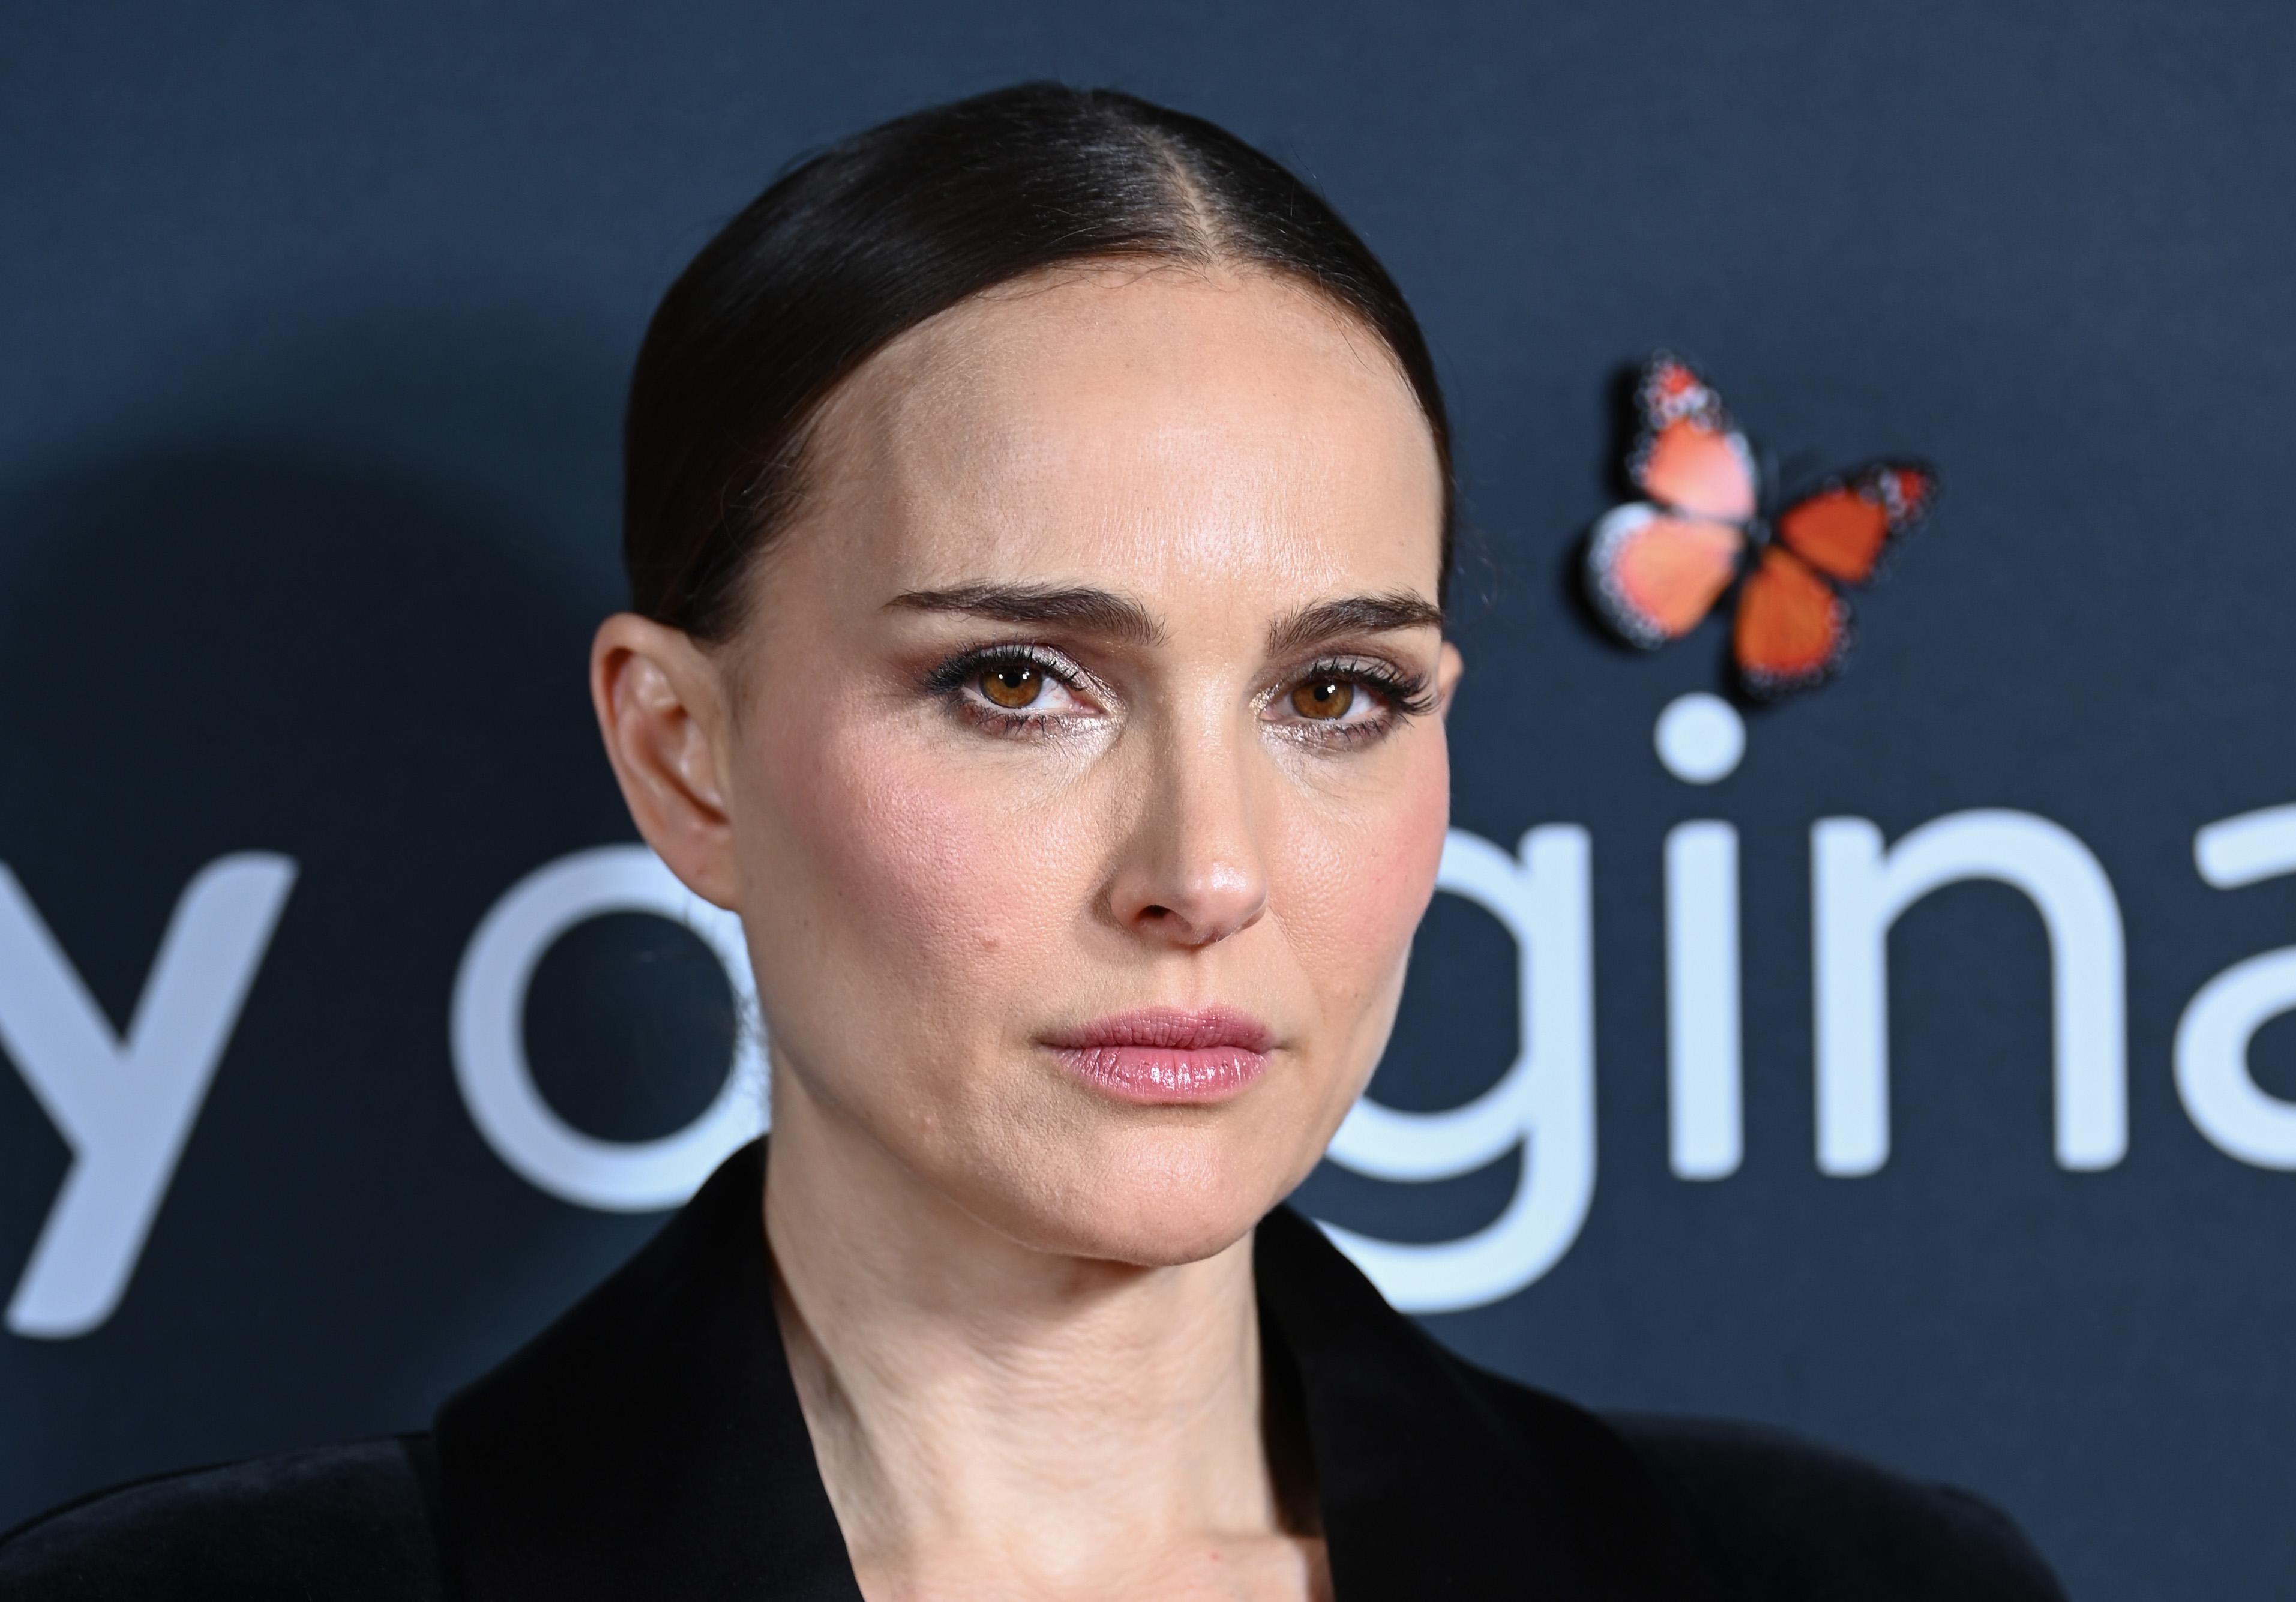 natalie portman says kids don't know movie stars anymore, but there's ‘liberation in having your art not be a popular art'